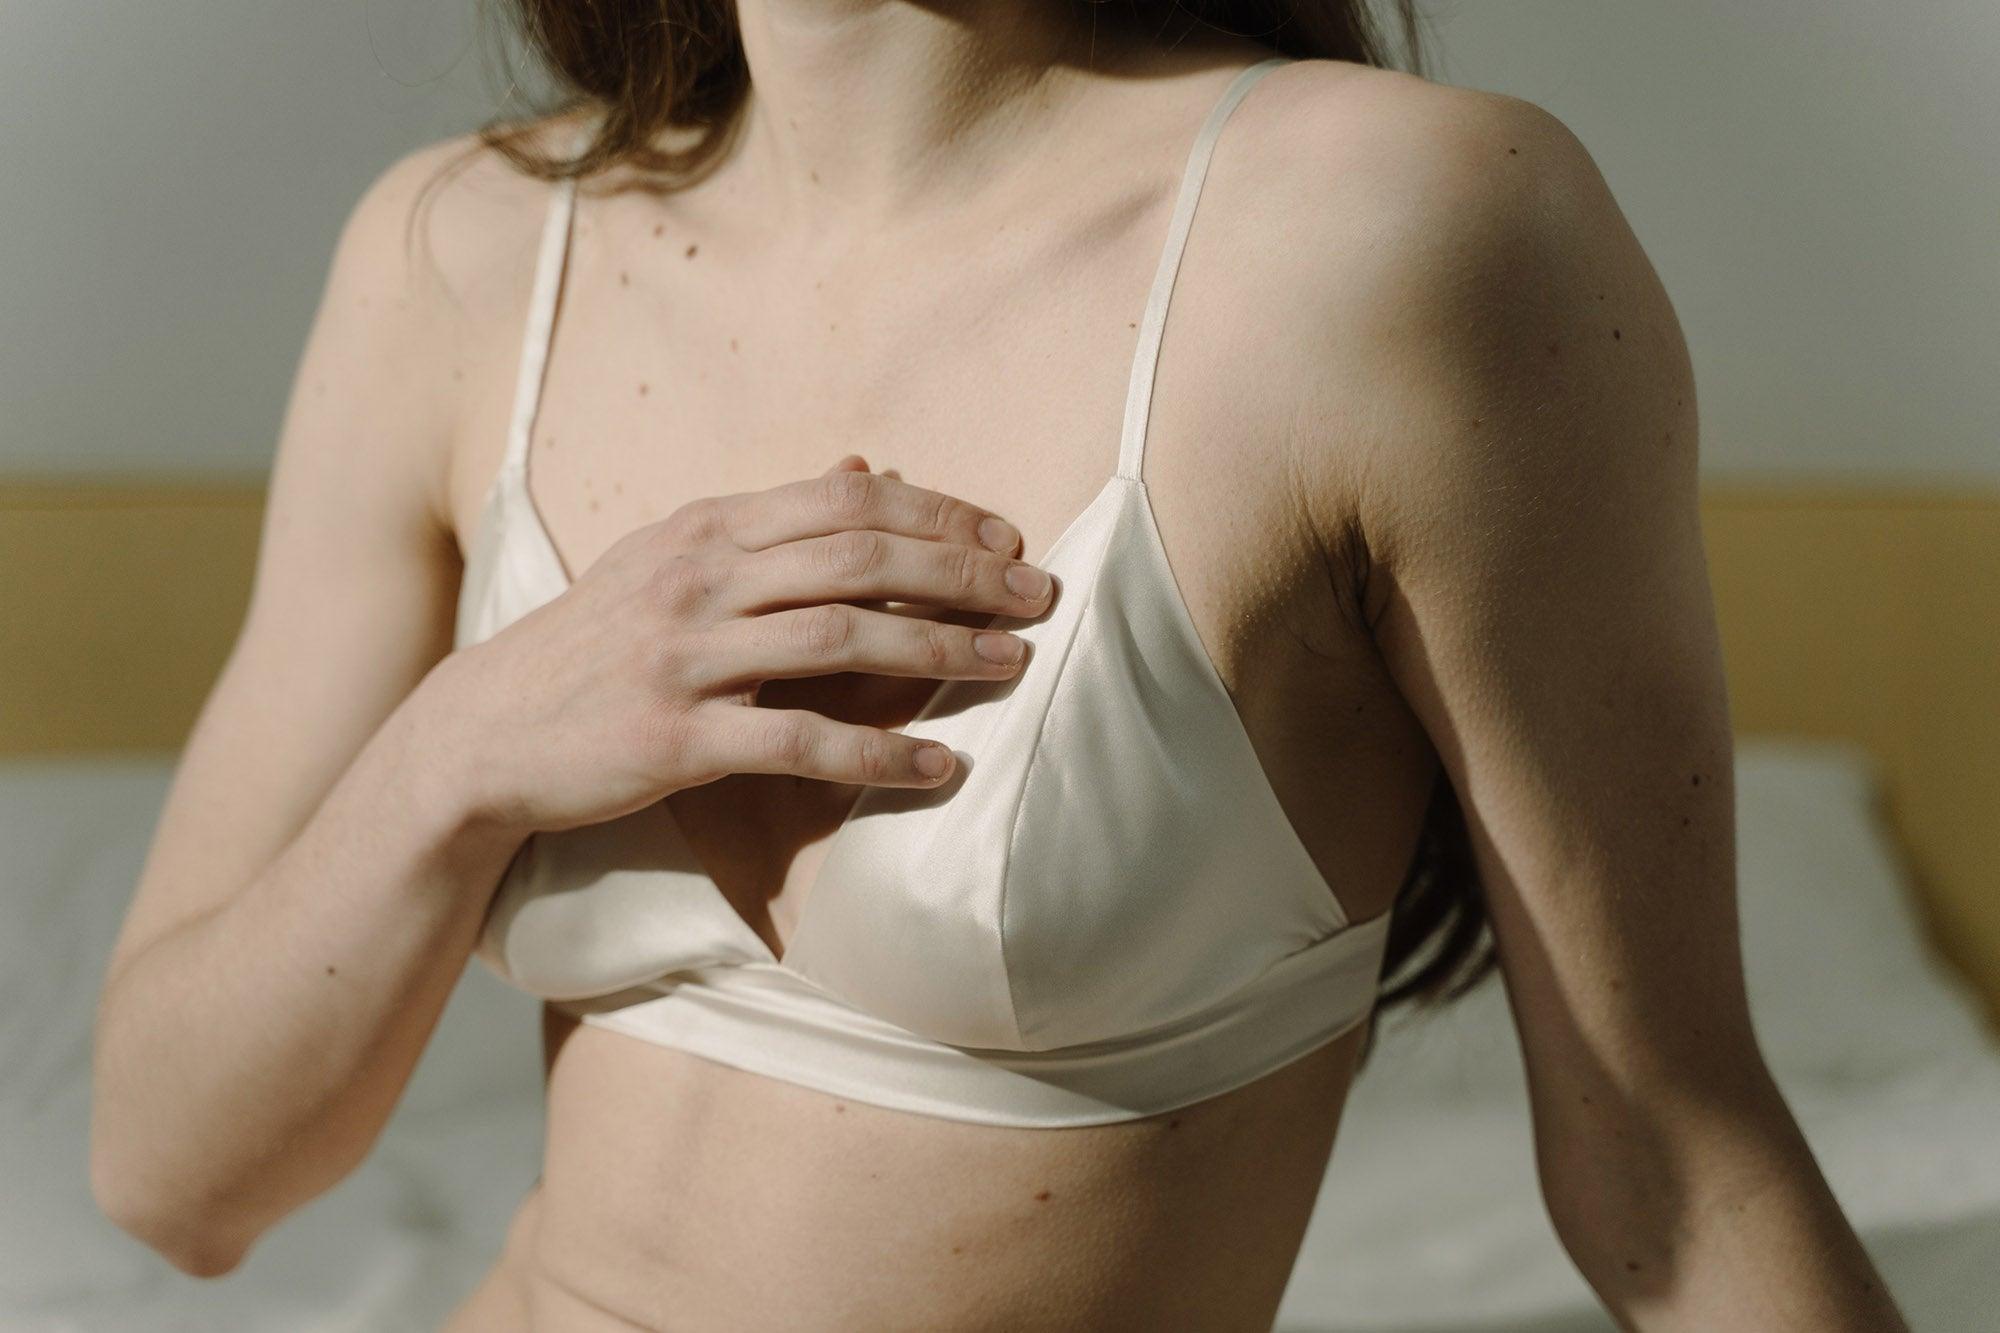 Ow! Breast tenderness or soreness can get intense during perimenopause. (Photo credit: Pexels)